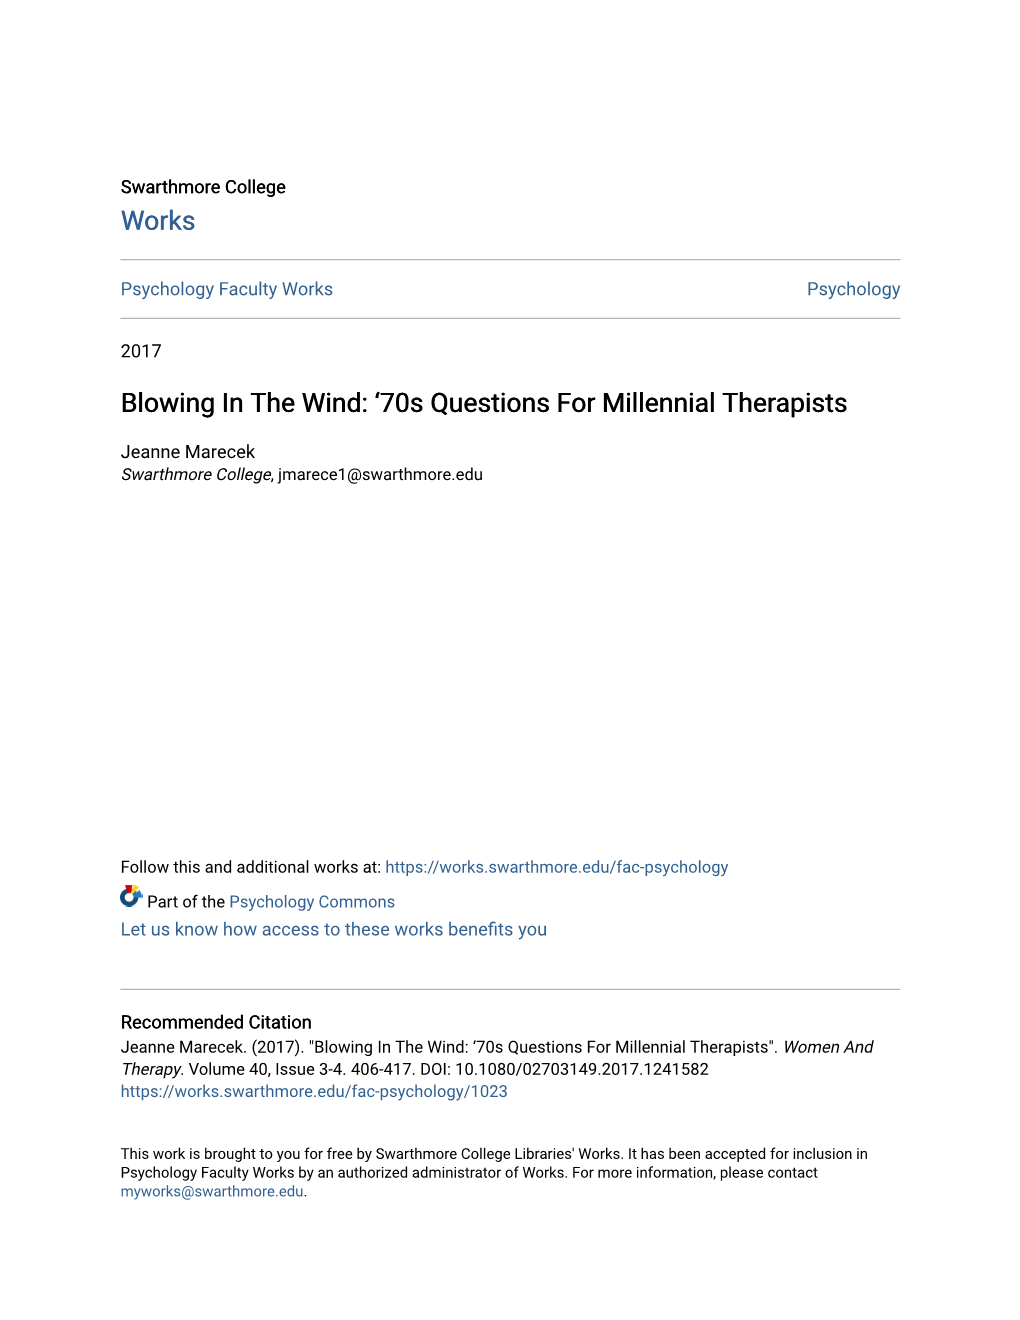 Blowing in the Wind: '70S Questions for Millennial Therapists